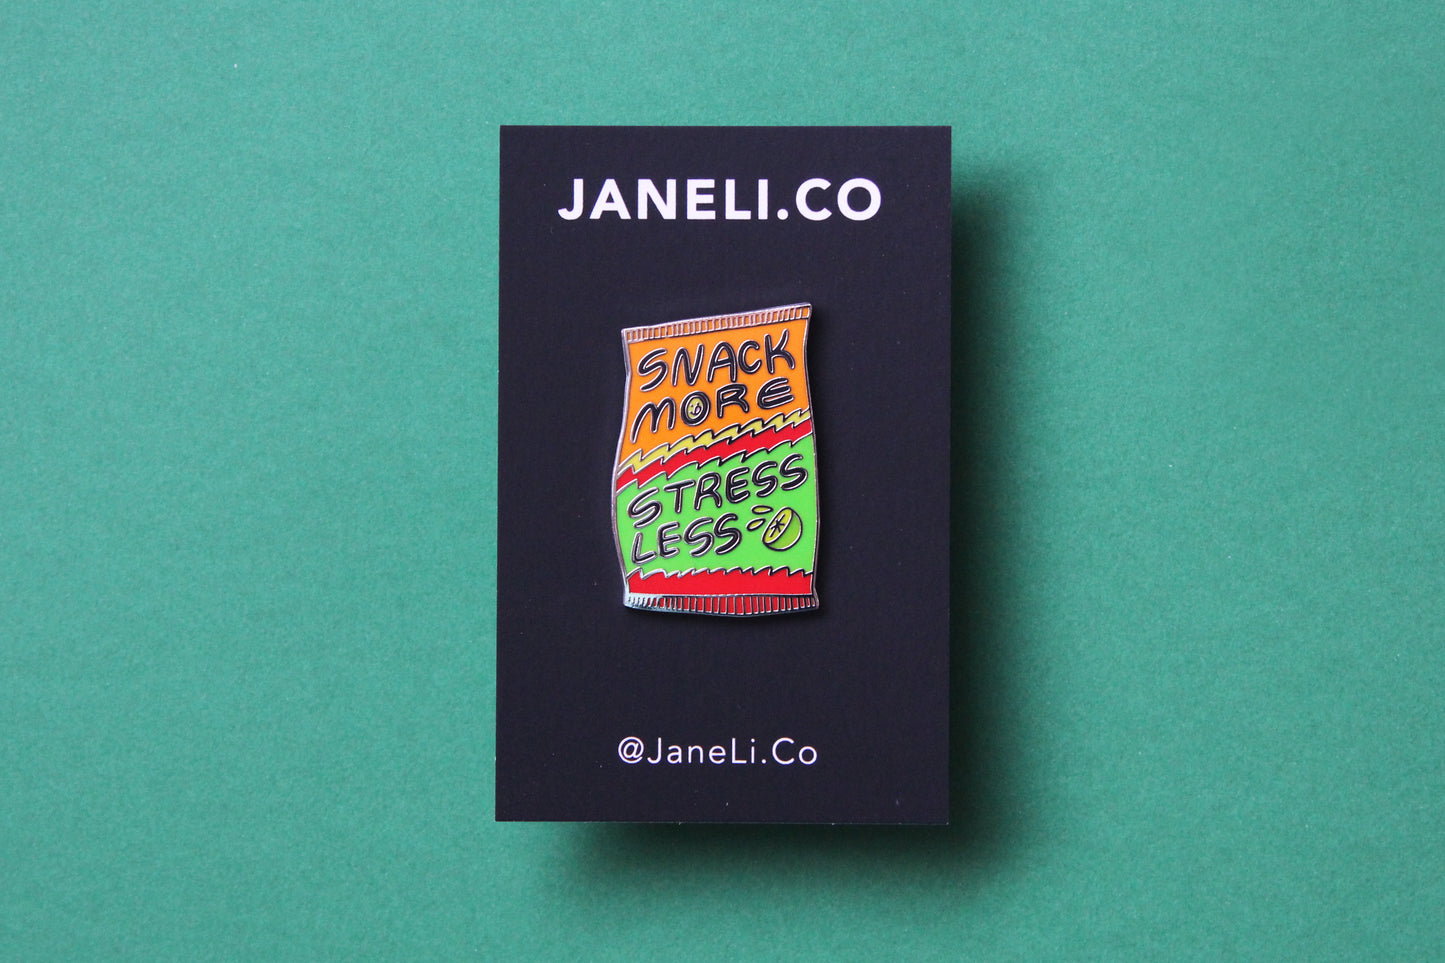 An enamel pin showing a chip bag that says "Snack More Stress Less" on a black JaneLi.Co backing card over a green background.